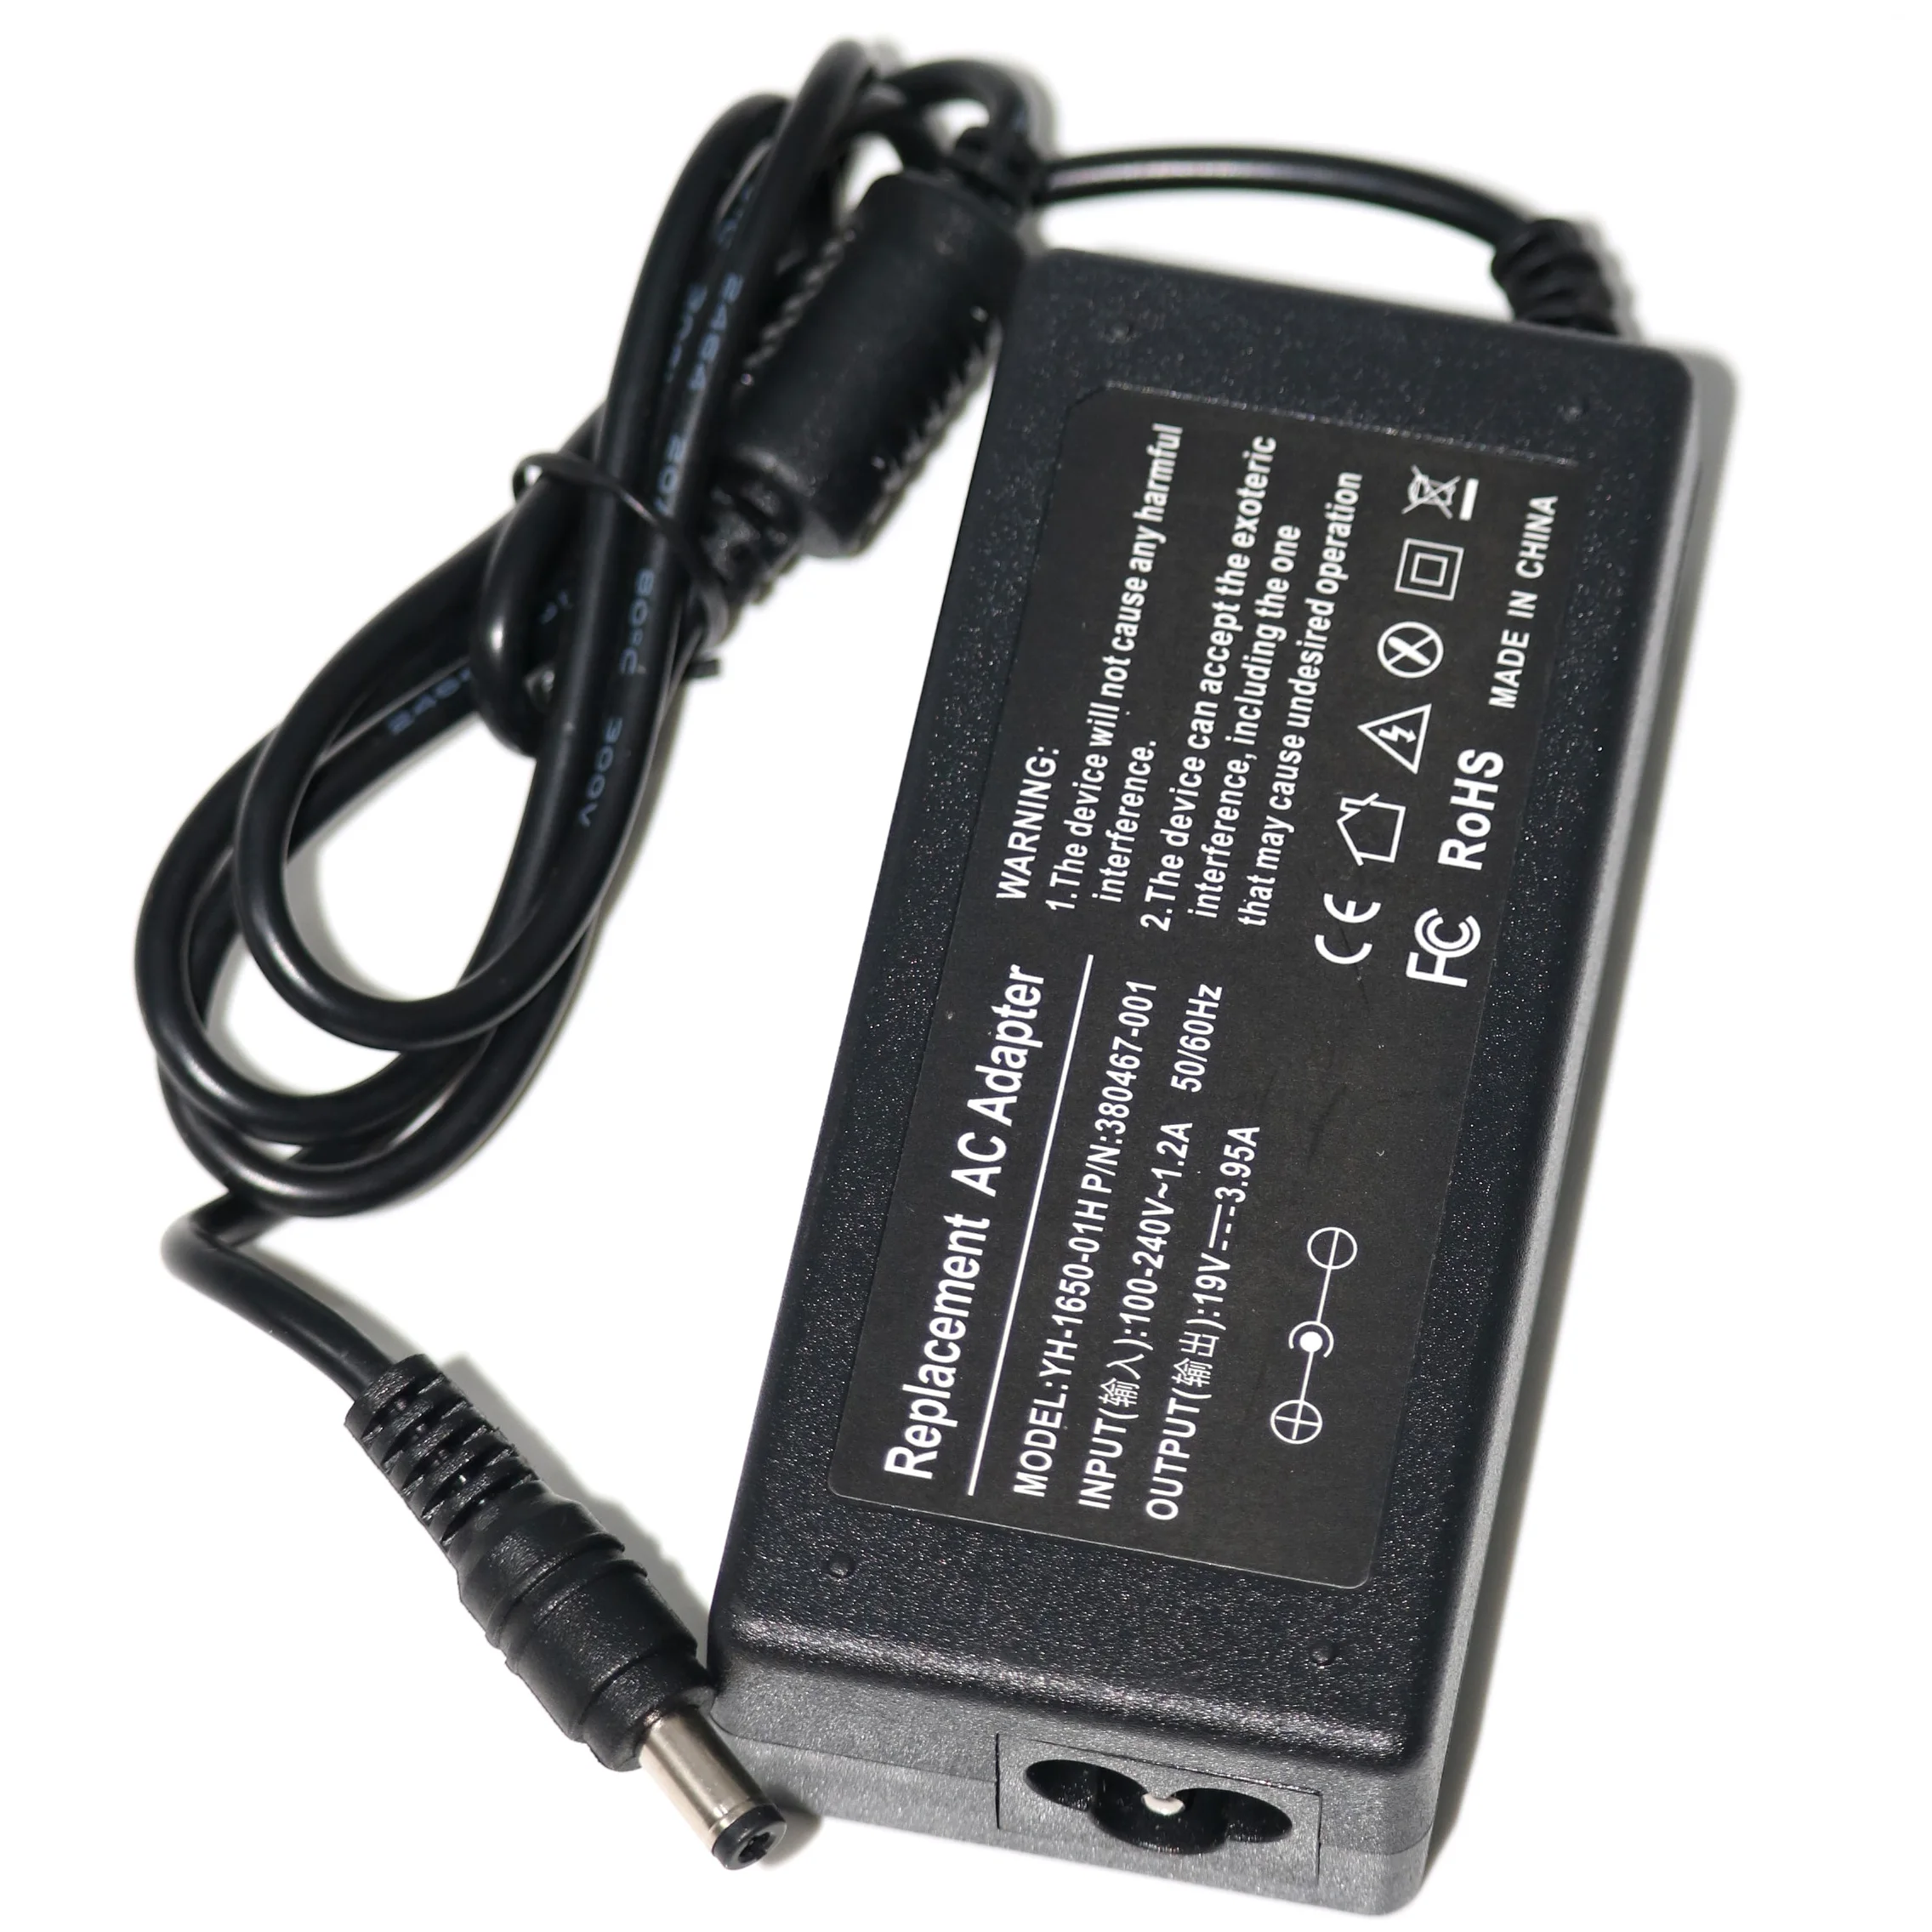 

19V 3.95A 75W AC Adapter Laptop Charger Compatible with Toshiba Satellite C50 C55 C55D C75D C875 C675 C655 C850 C655D C855D L505